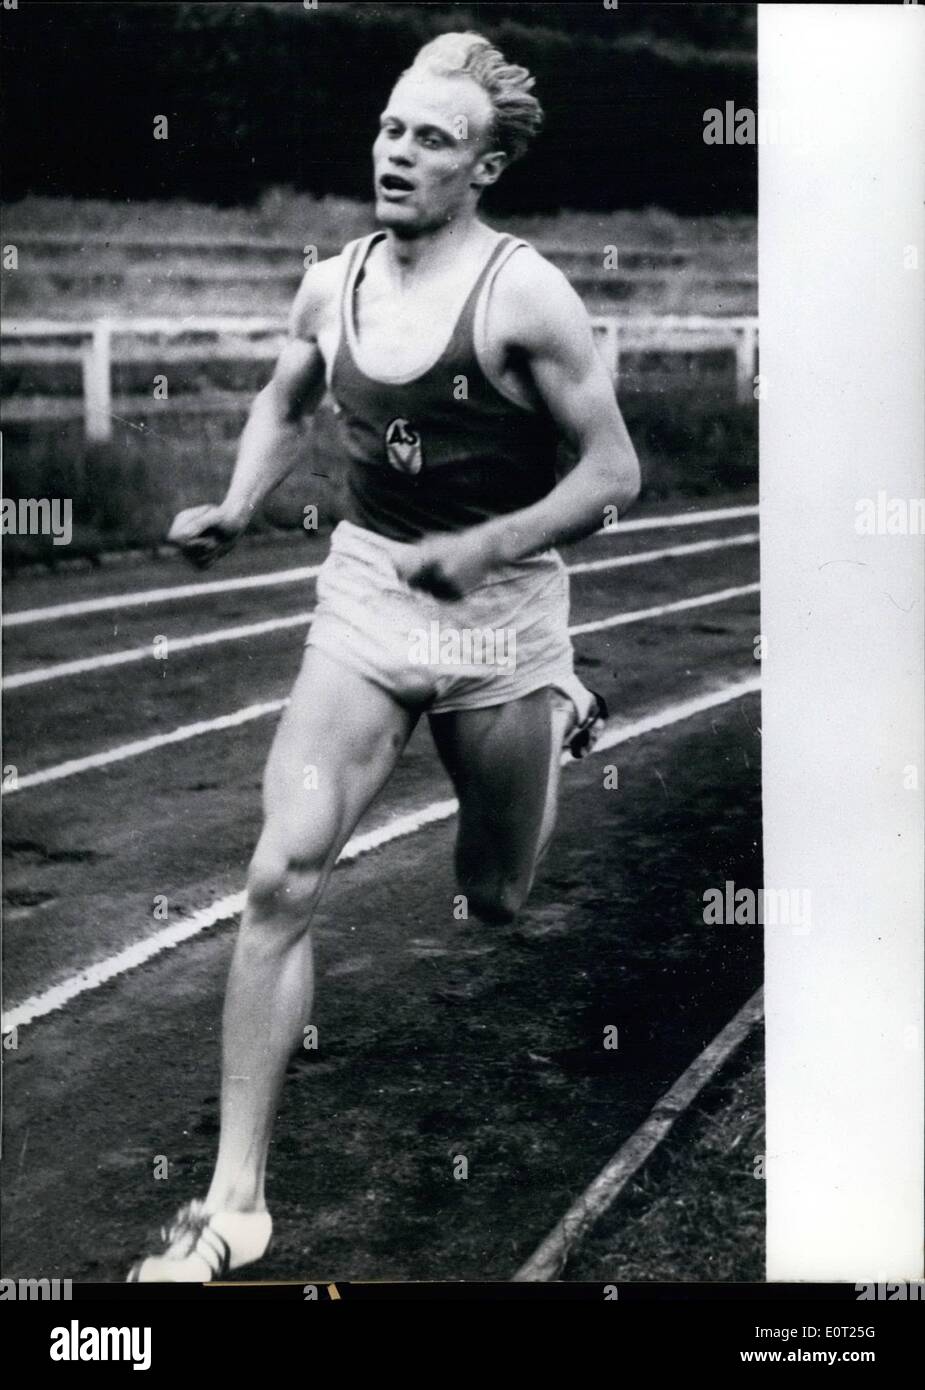 Jul. 07, 1960 - Siegfried Valentin runs world record over 1000 meters: On  July 19th, 1960, the East Berliner Siegfried Valentin Stock Photo - Alamy